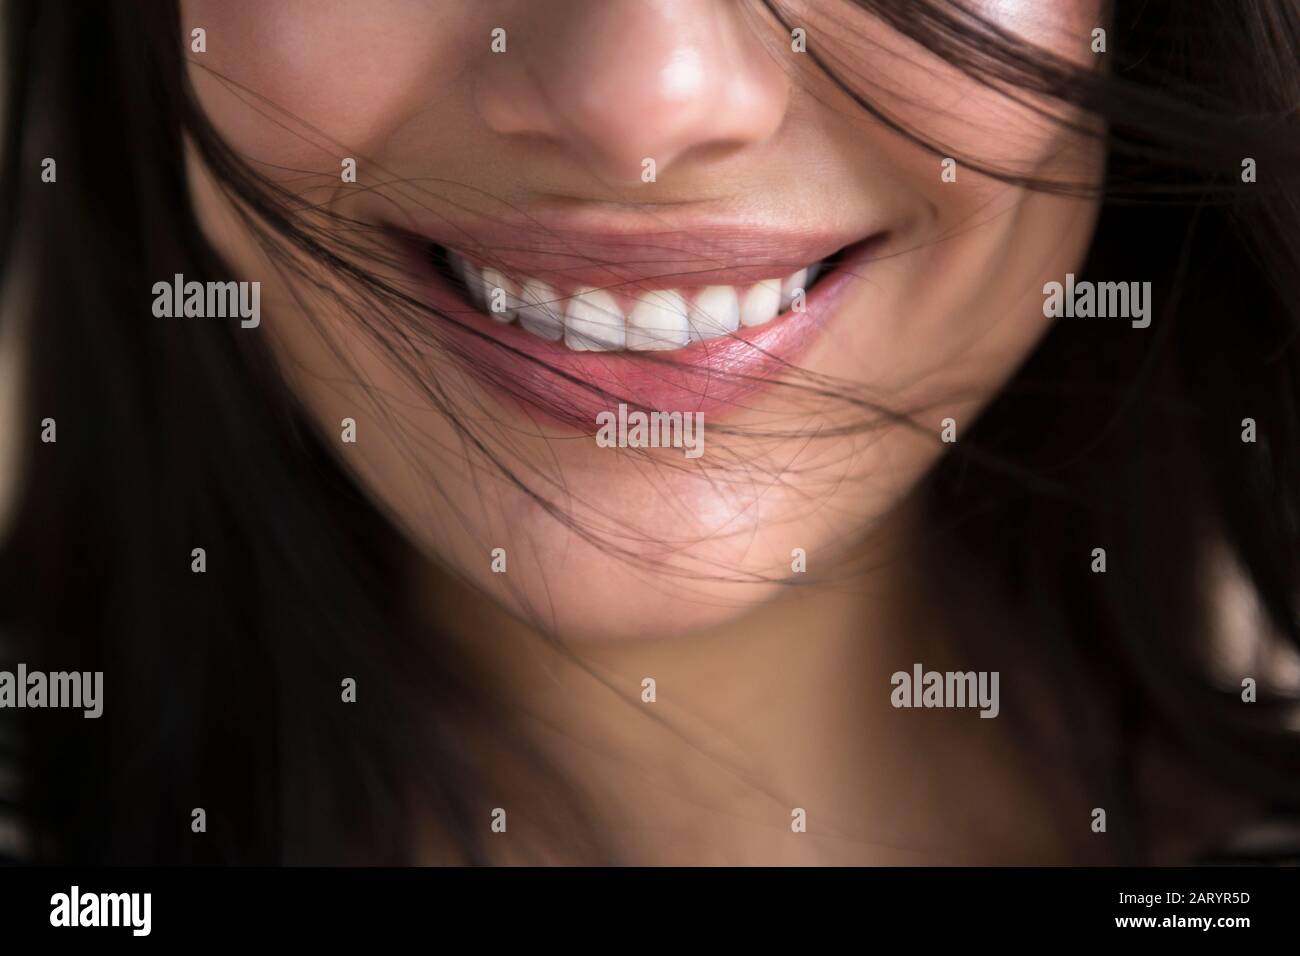 Close up of smiling woman's face Stock Photo